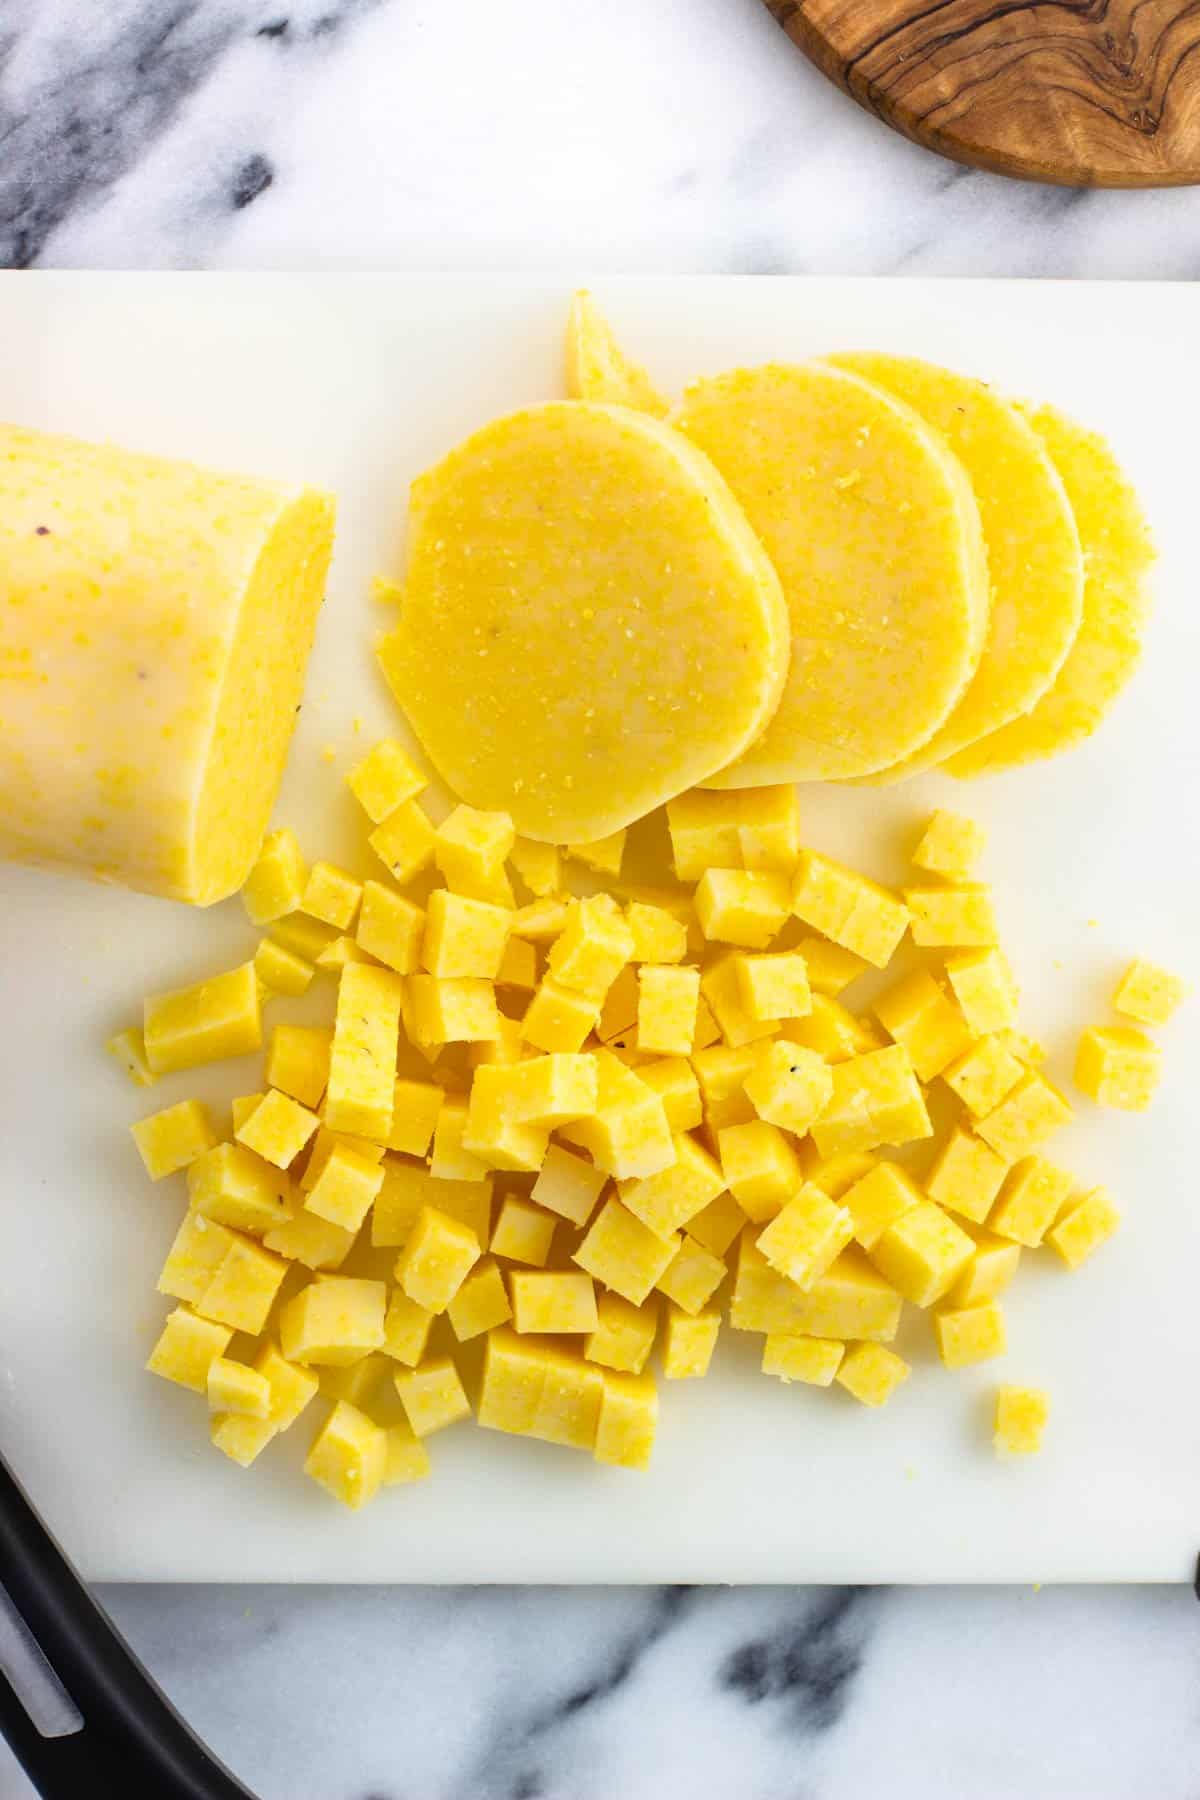 A tube of polenta being chopped into small cubes.